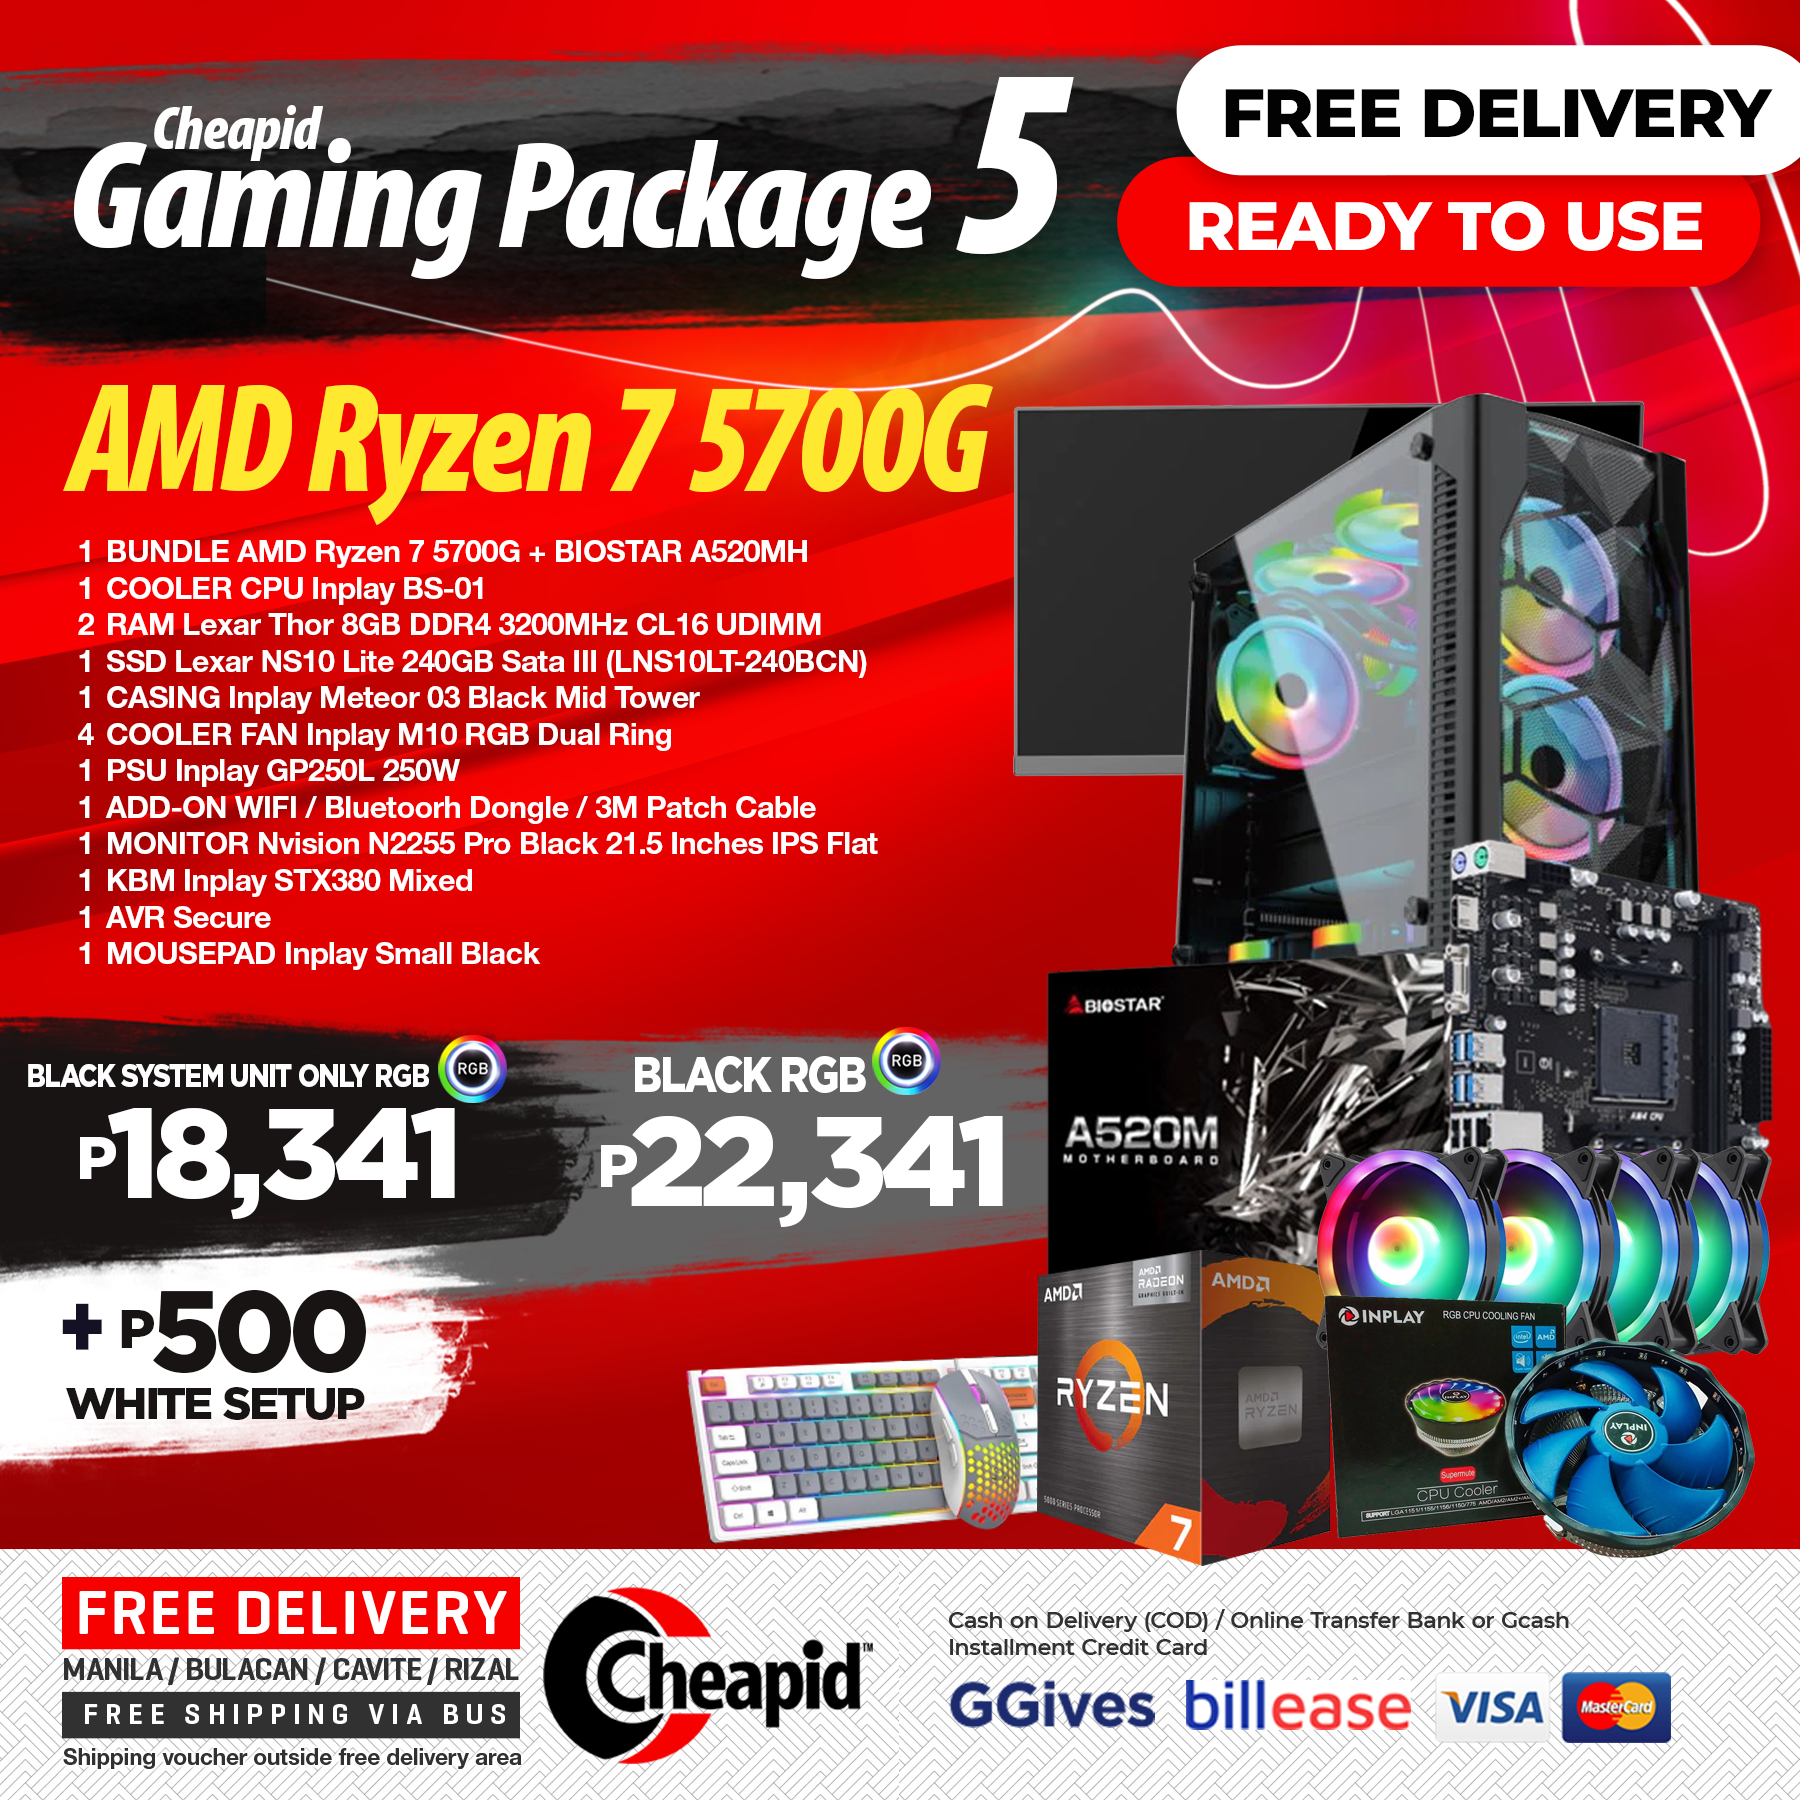 Cheapid Gaming Package - Classic Setup 05